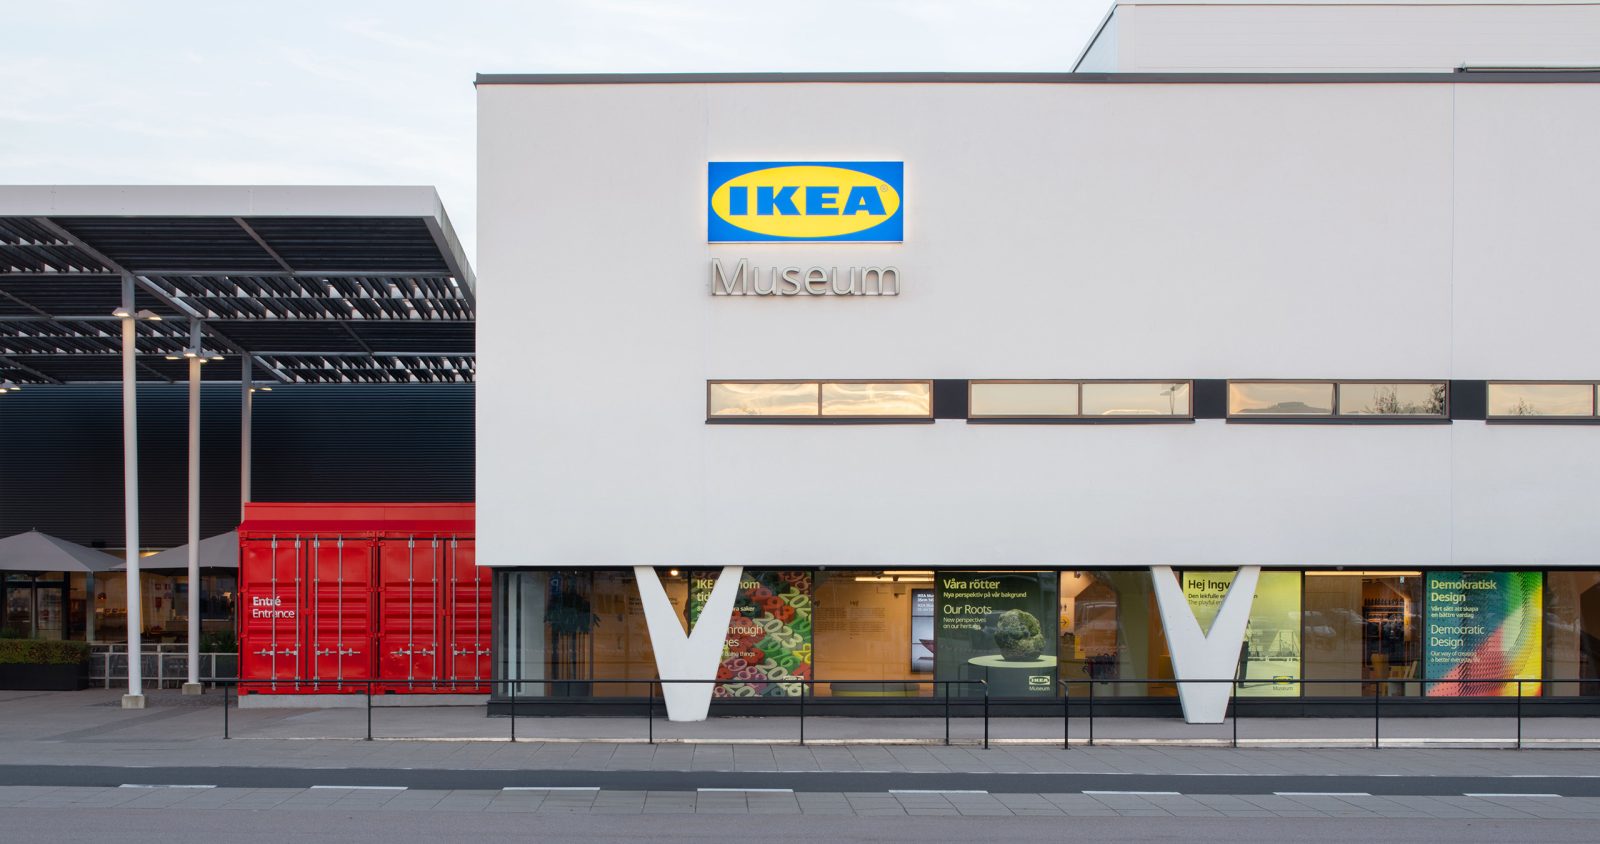 White building with clean lines and v-shaped pillars, sign on facade says IKEA Museum.